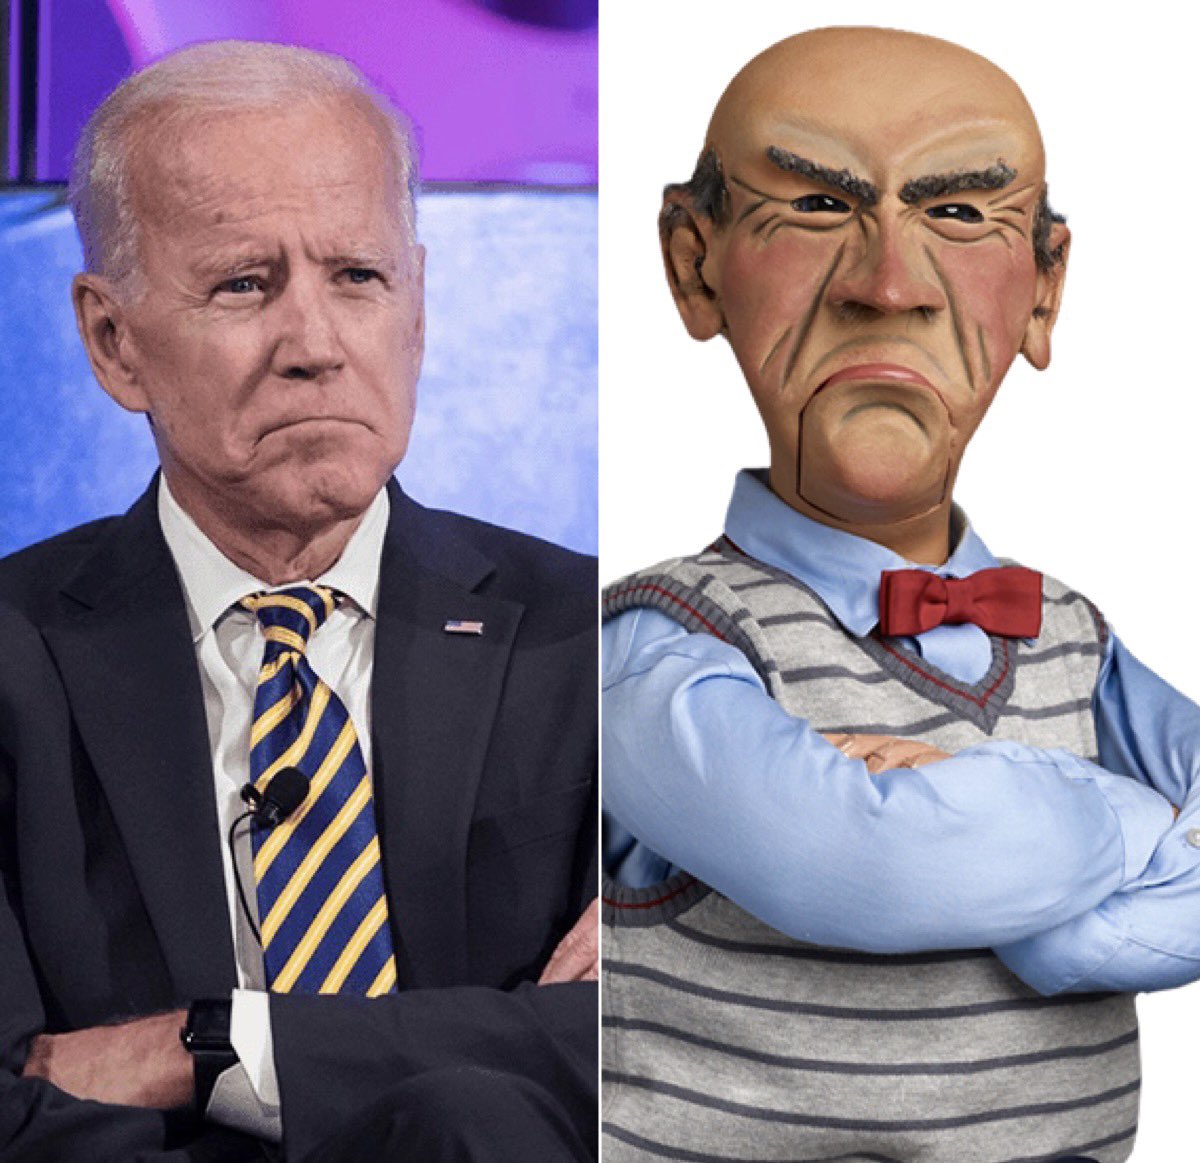 So no one is gonna bring up the fact that Biden looks like Jeff Dunham’s puppet huh?